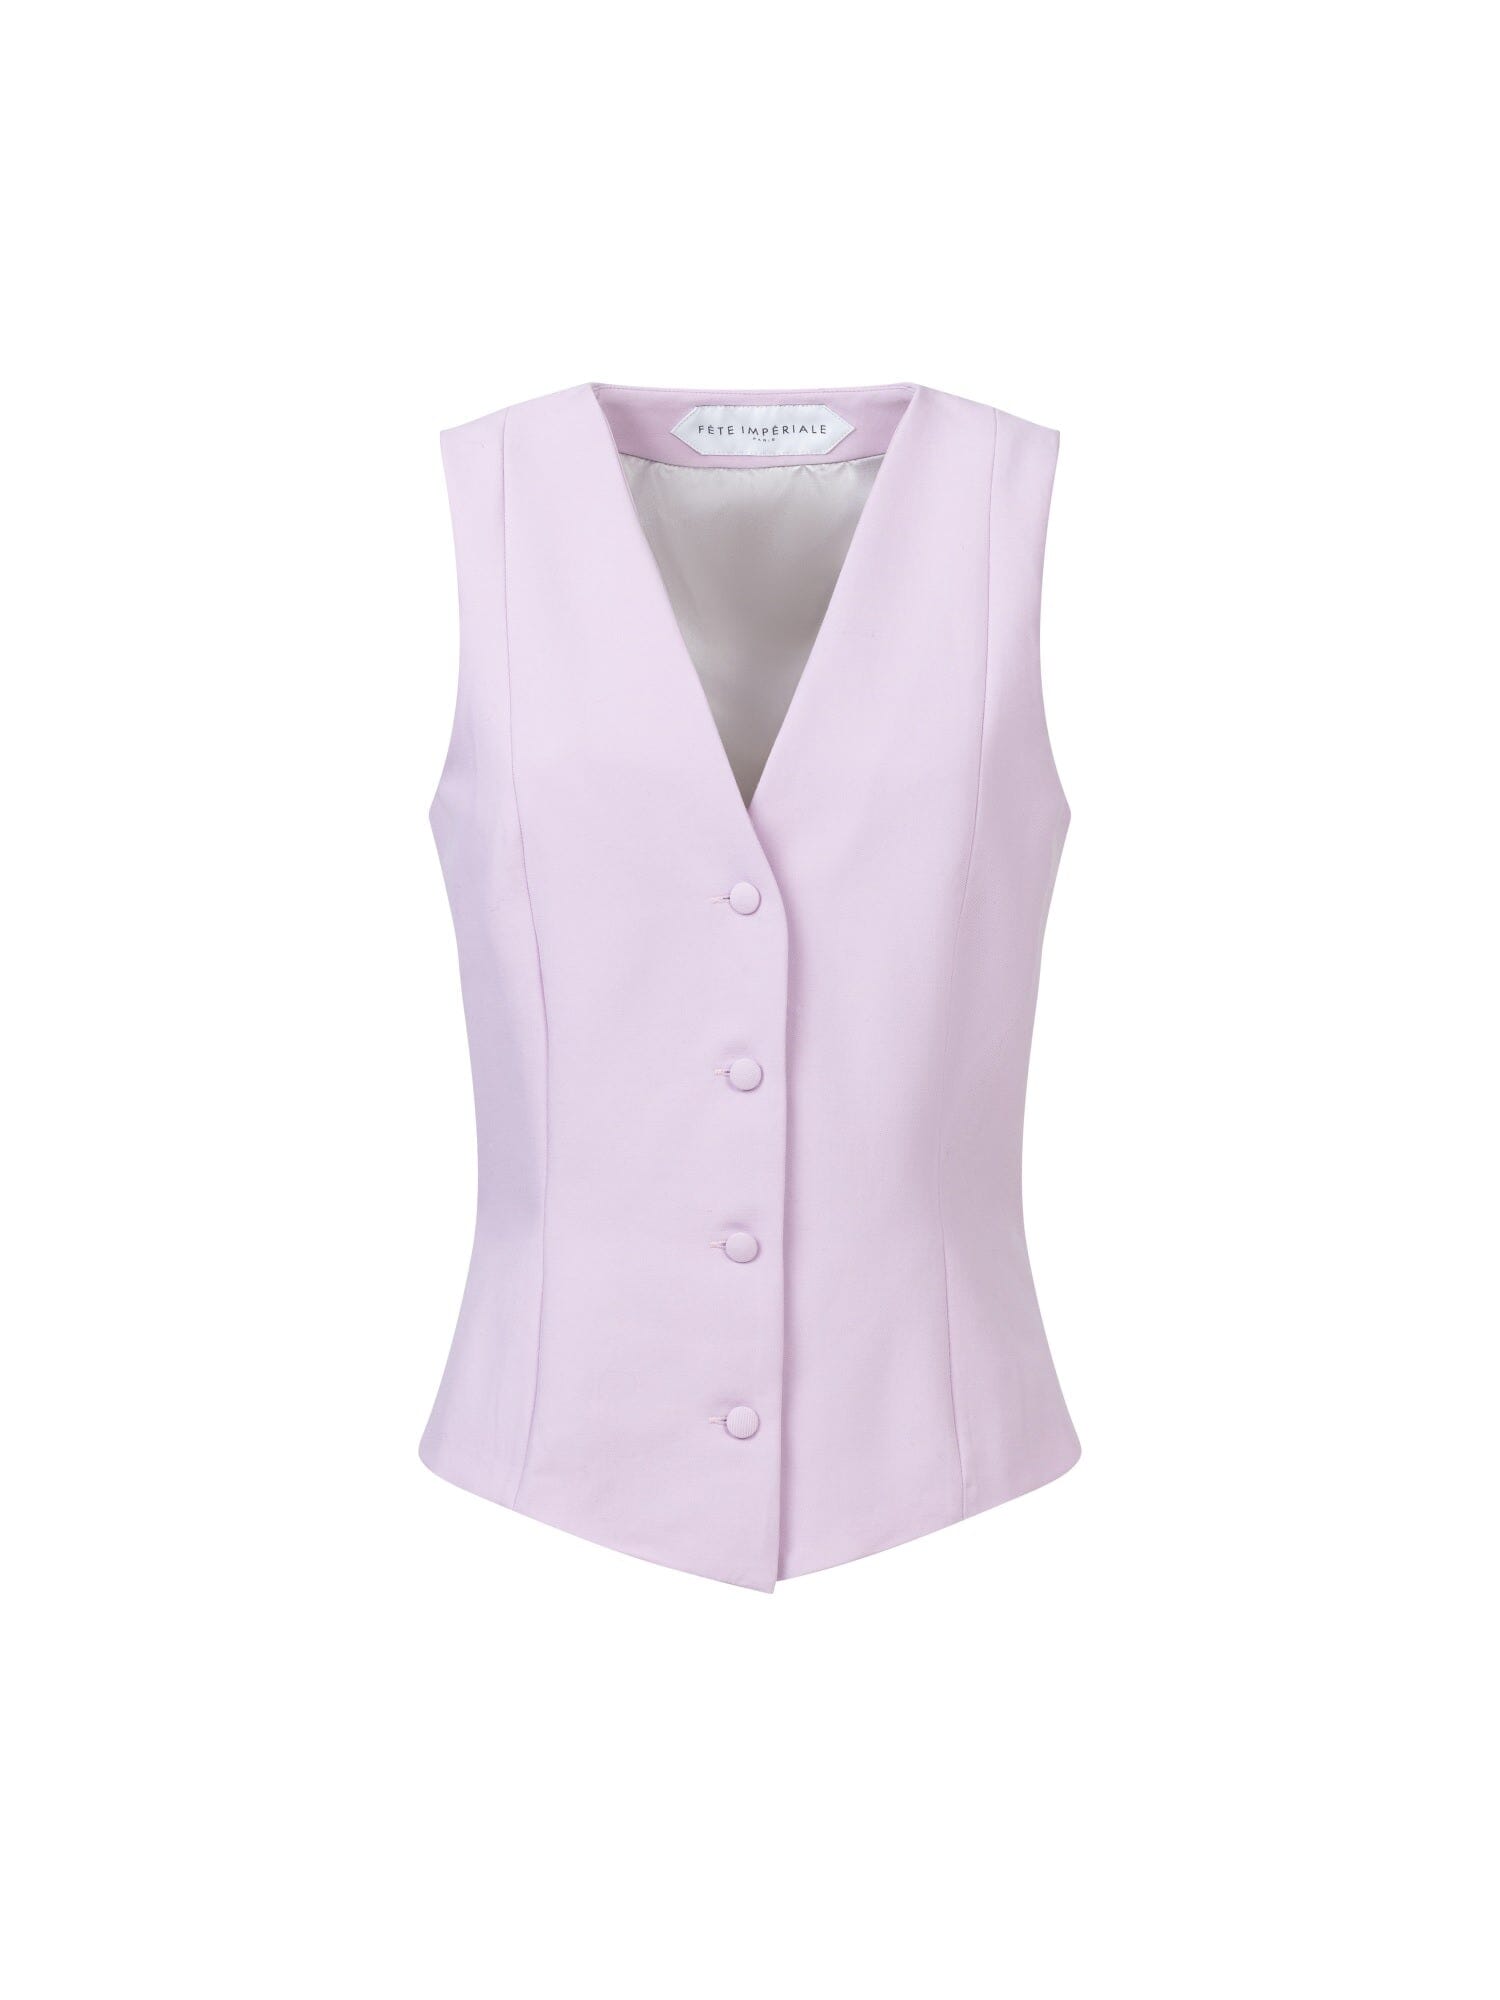 SHILI - Oeko Tex Orchid Bloom Top stretch wool twill sleeveless buttoned cardigan Fête Impériale